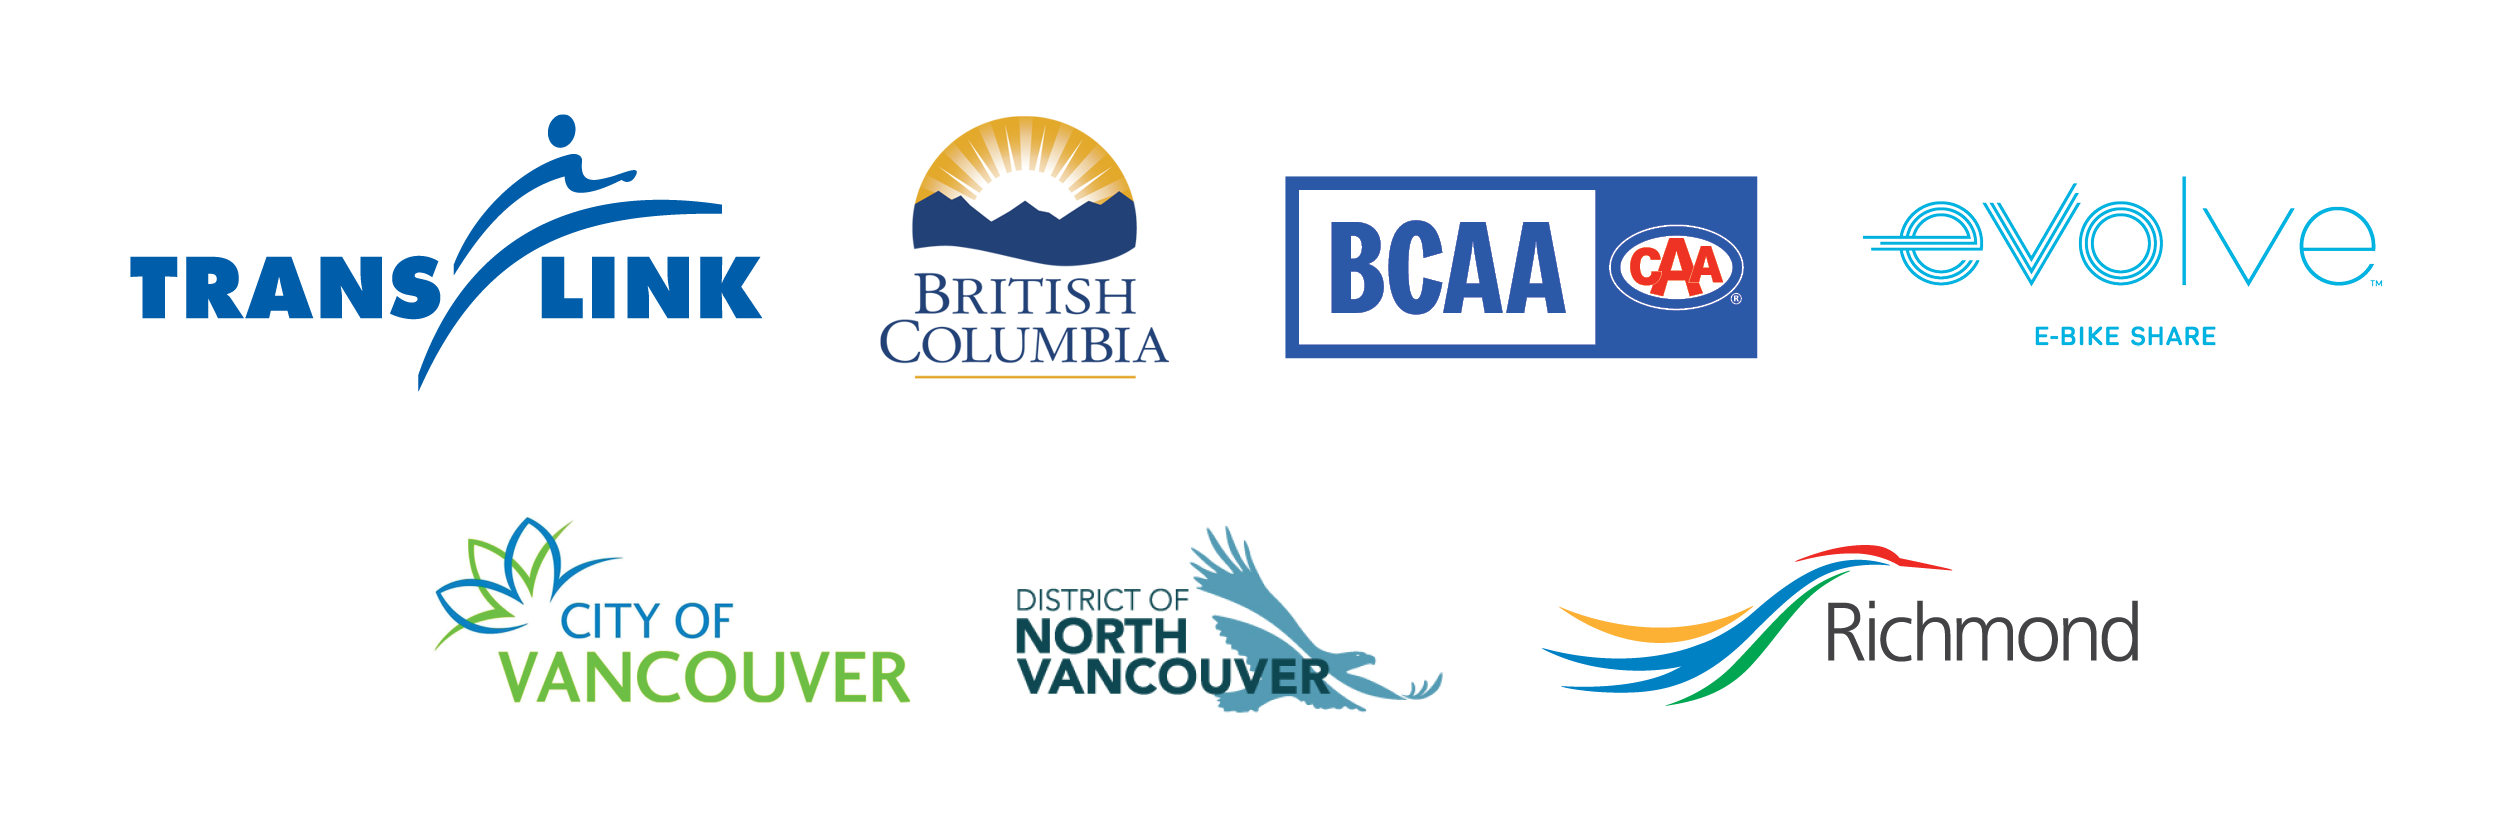 Sponsor slurry with logos from TransLink, the B.C. Government, BCAA, Evolve, the City of Vancouver, the District of North Vancouver, and the City of Richmond.